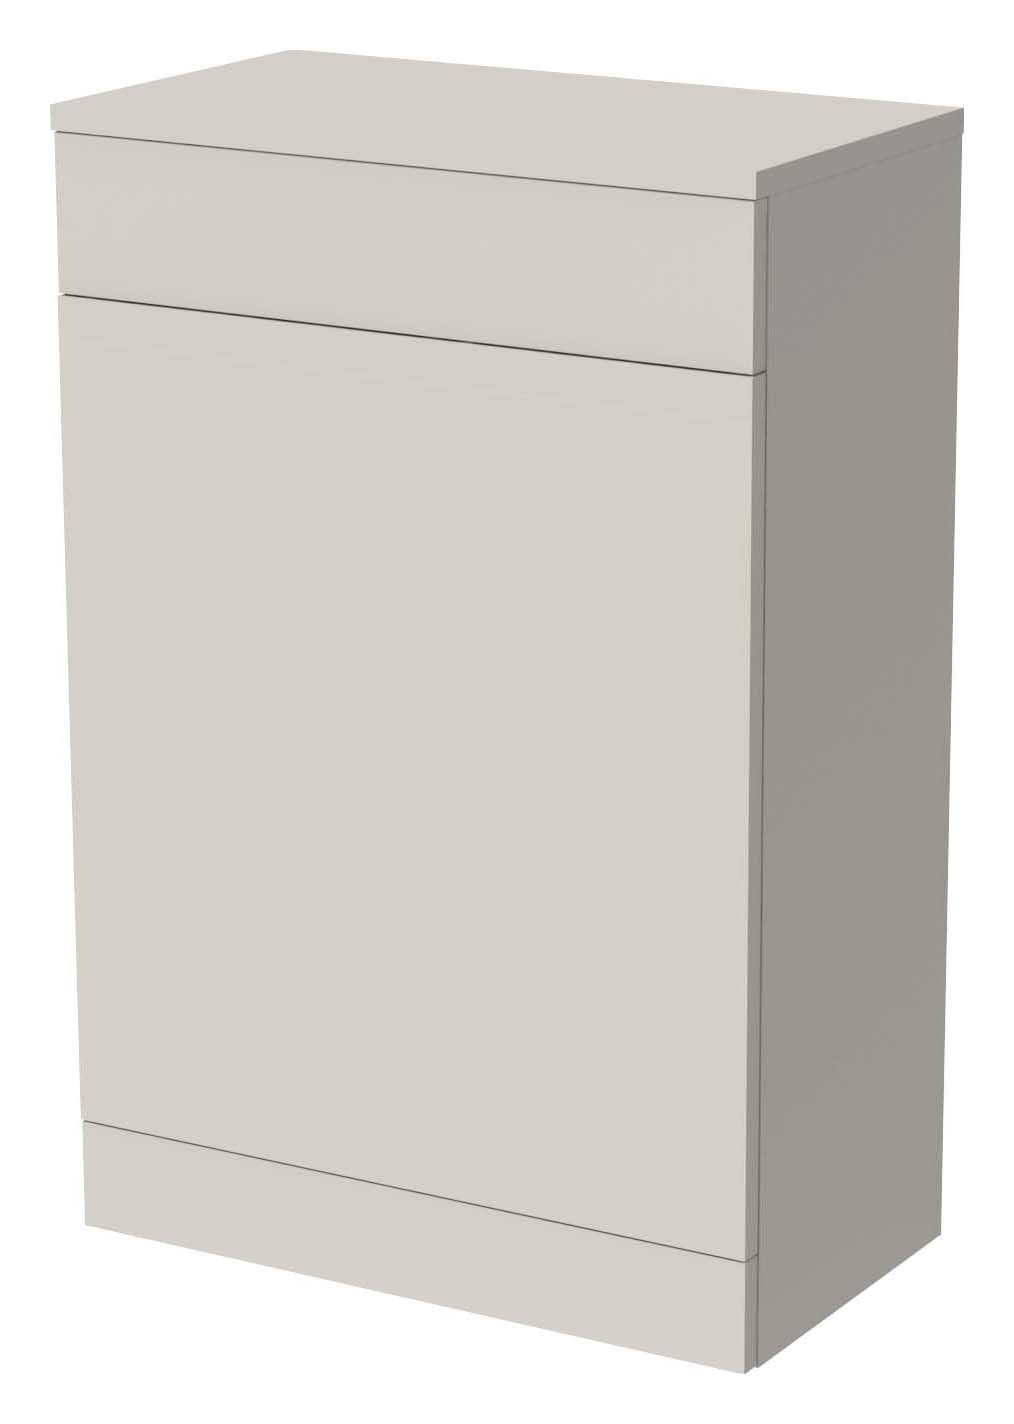 Image of Wickes Grey Gloss Toilet Unit - 820 X 550mm